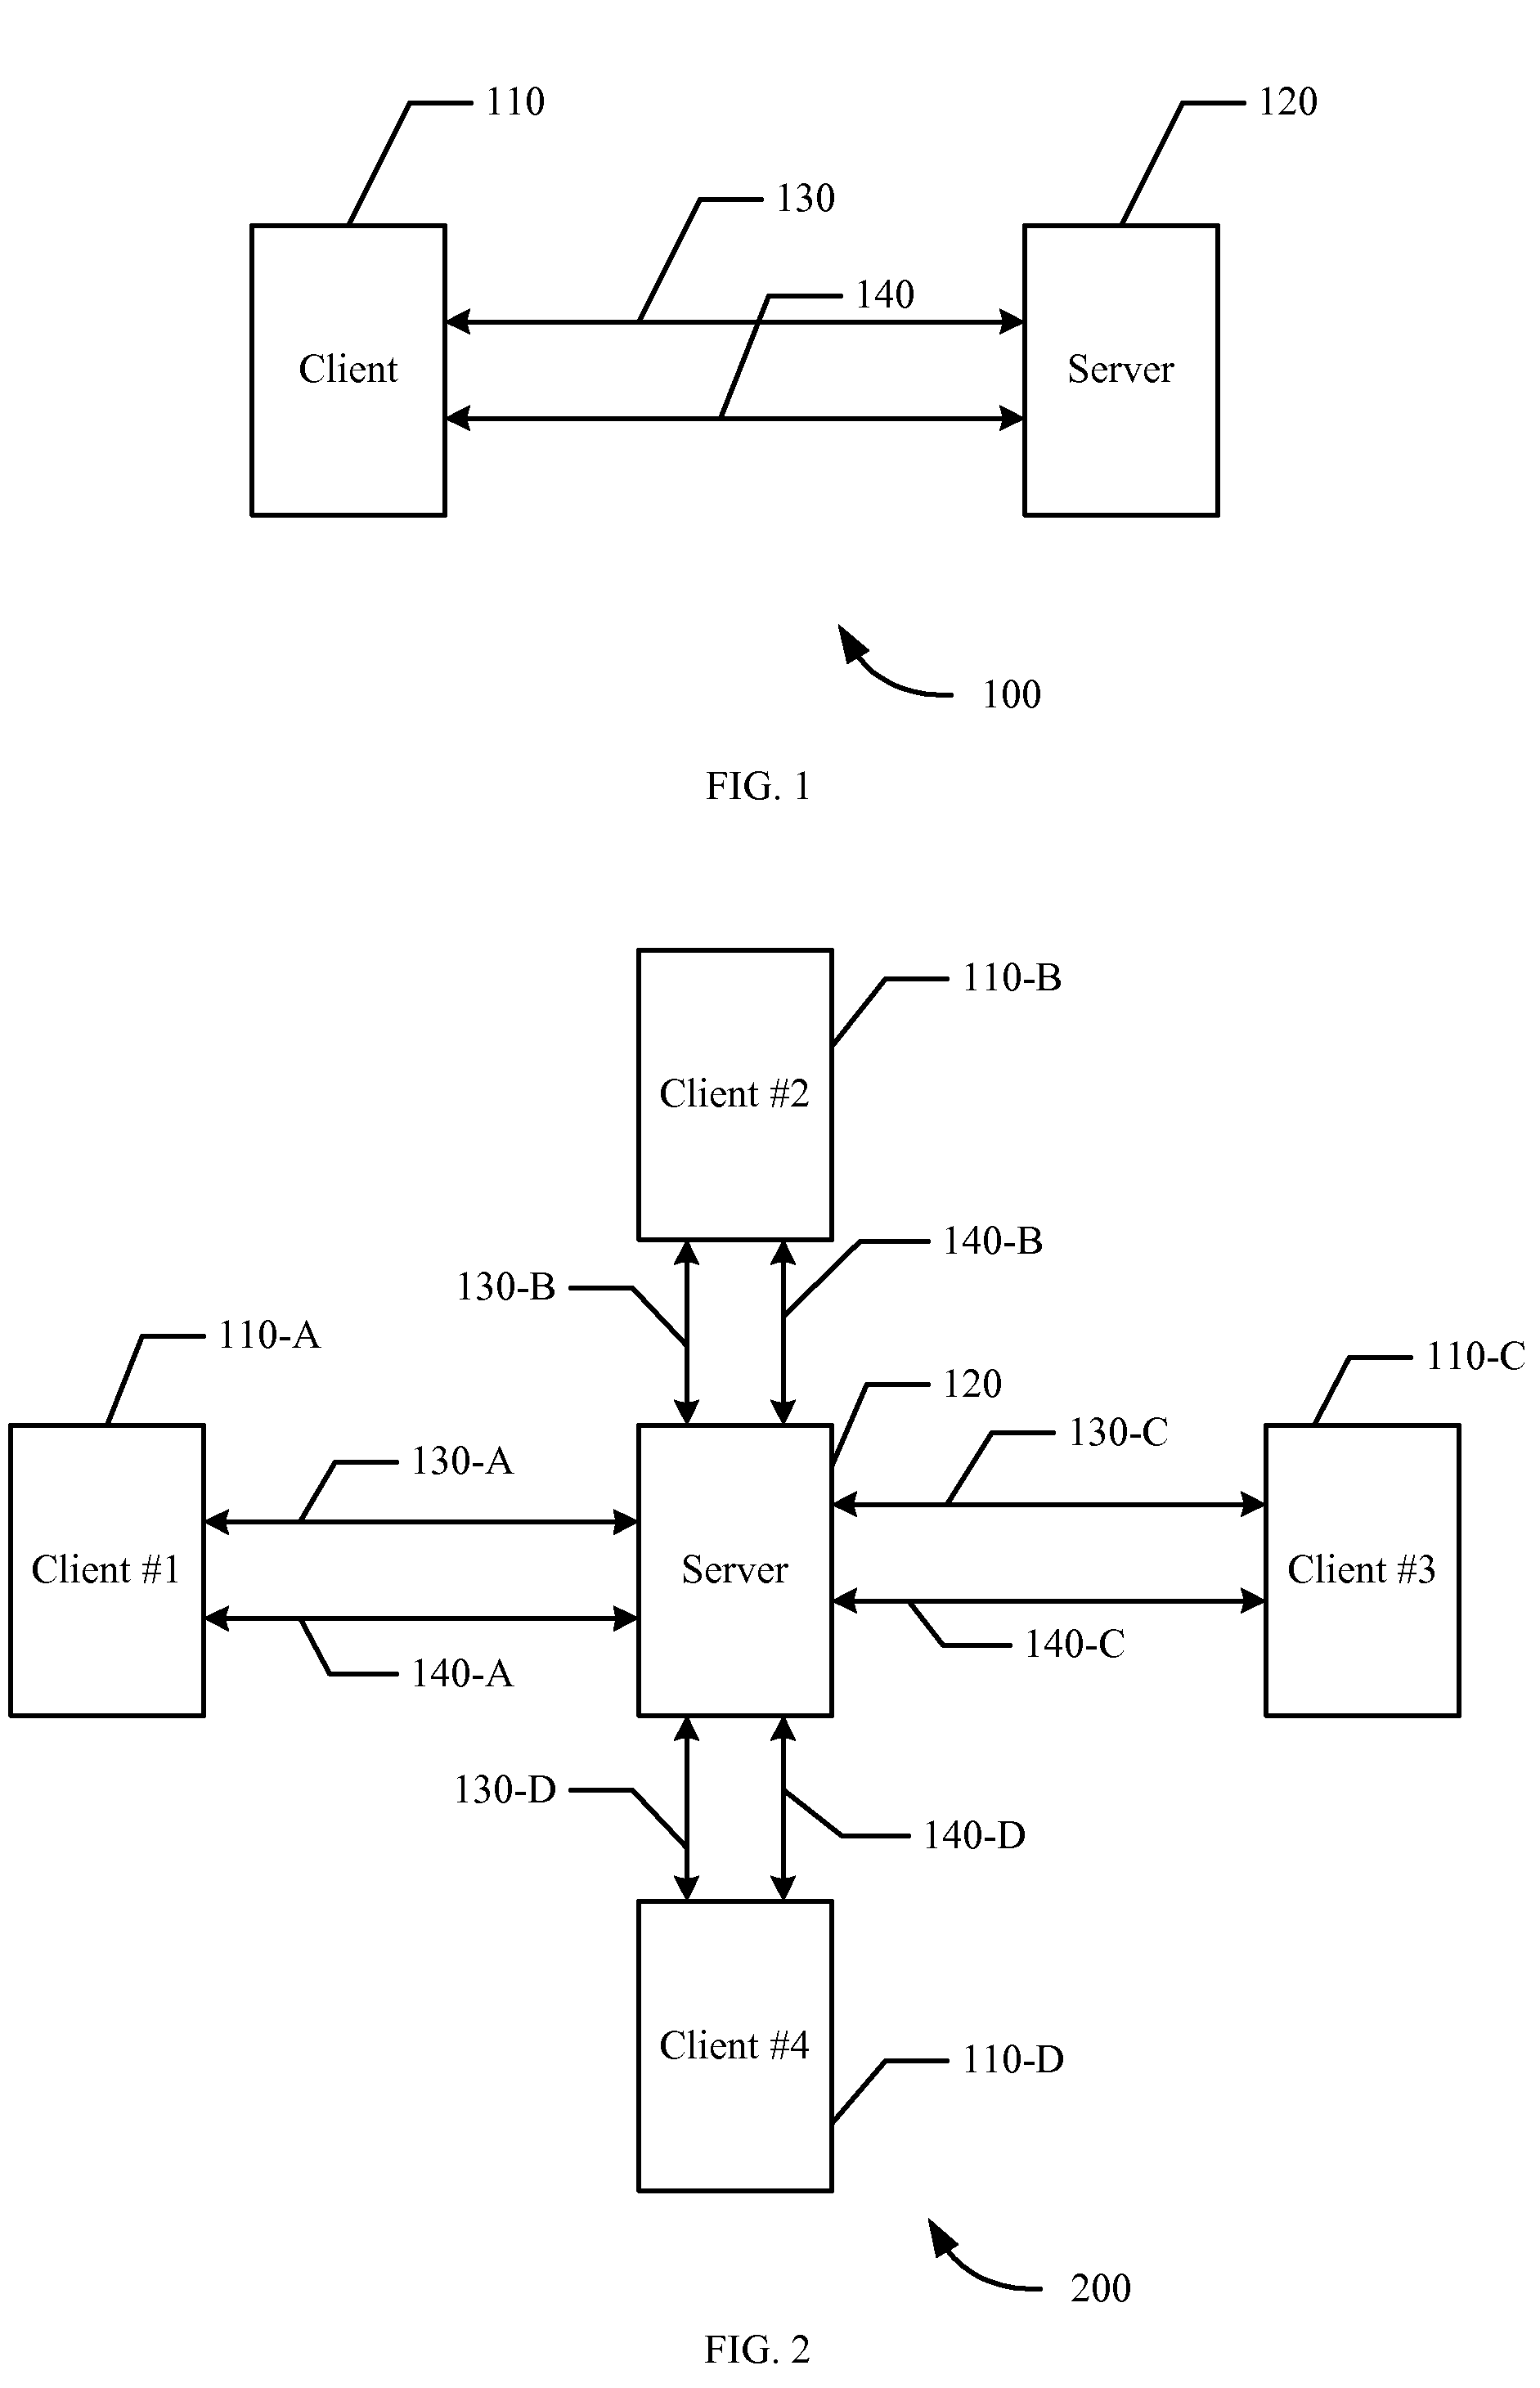 Method And System For Messaging And Communication Based On Groups